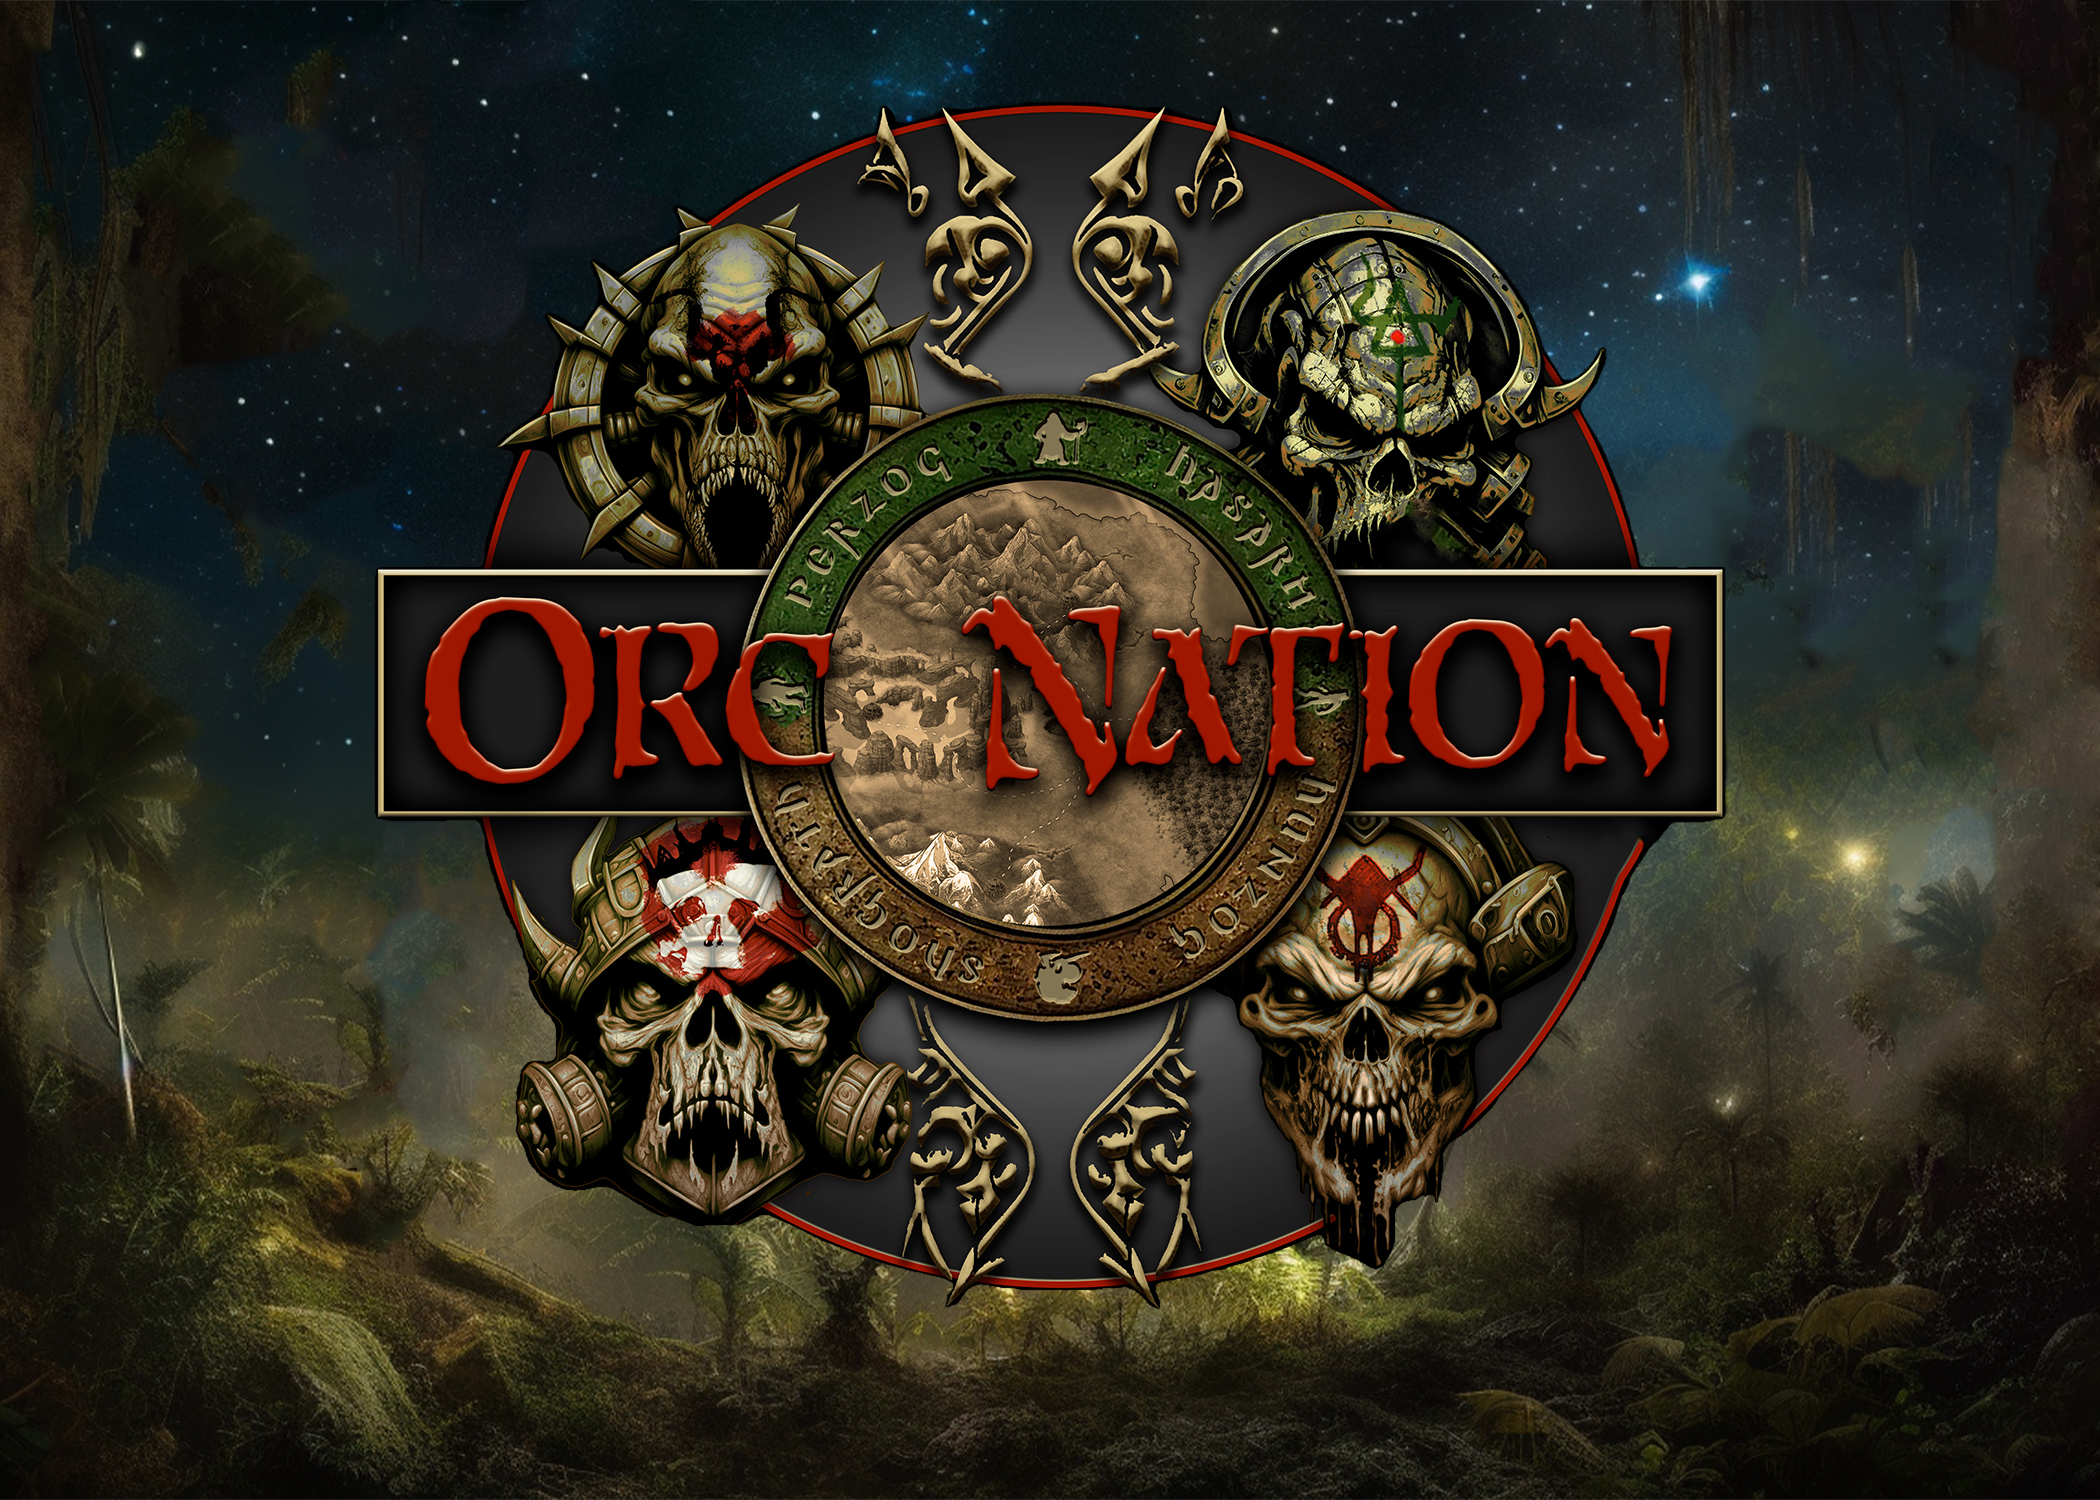 The Orc Nation